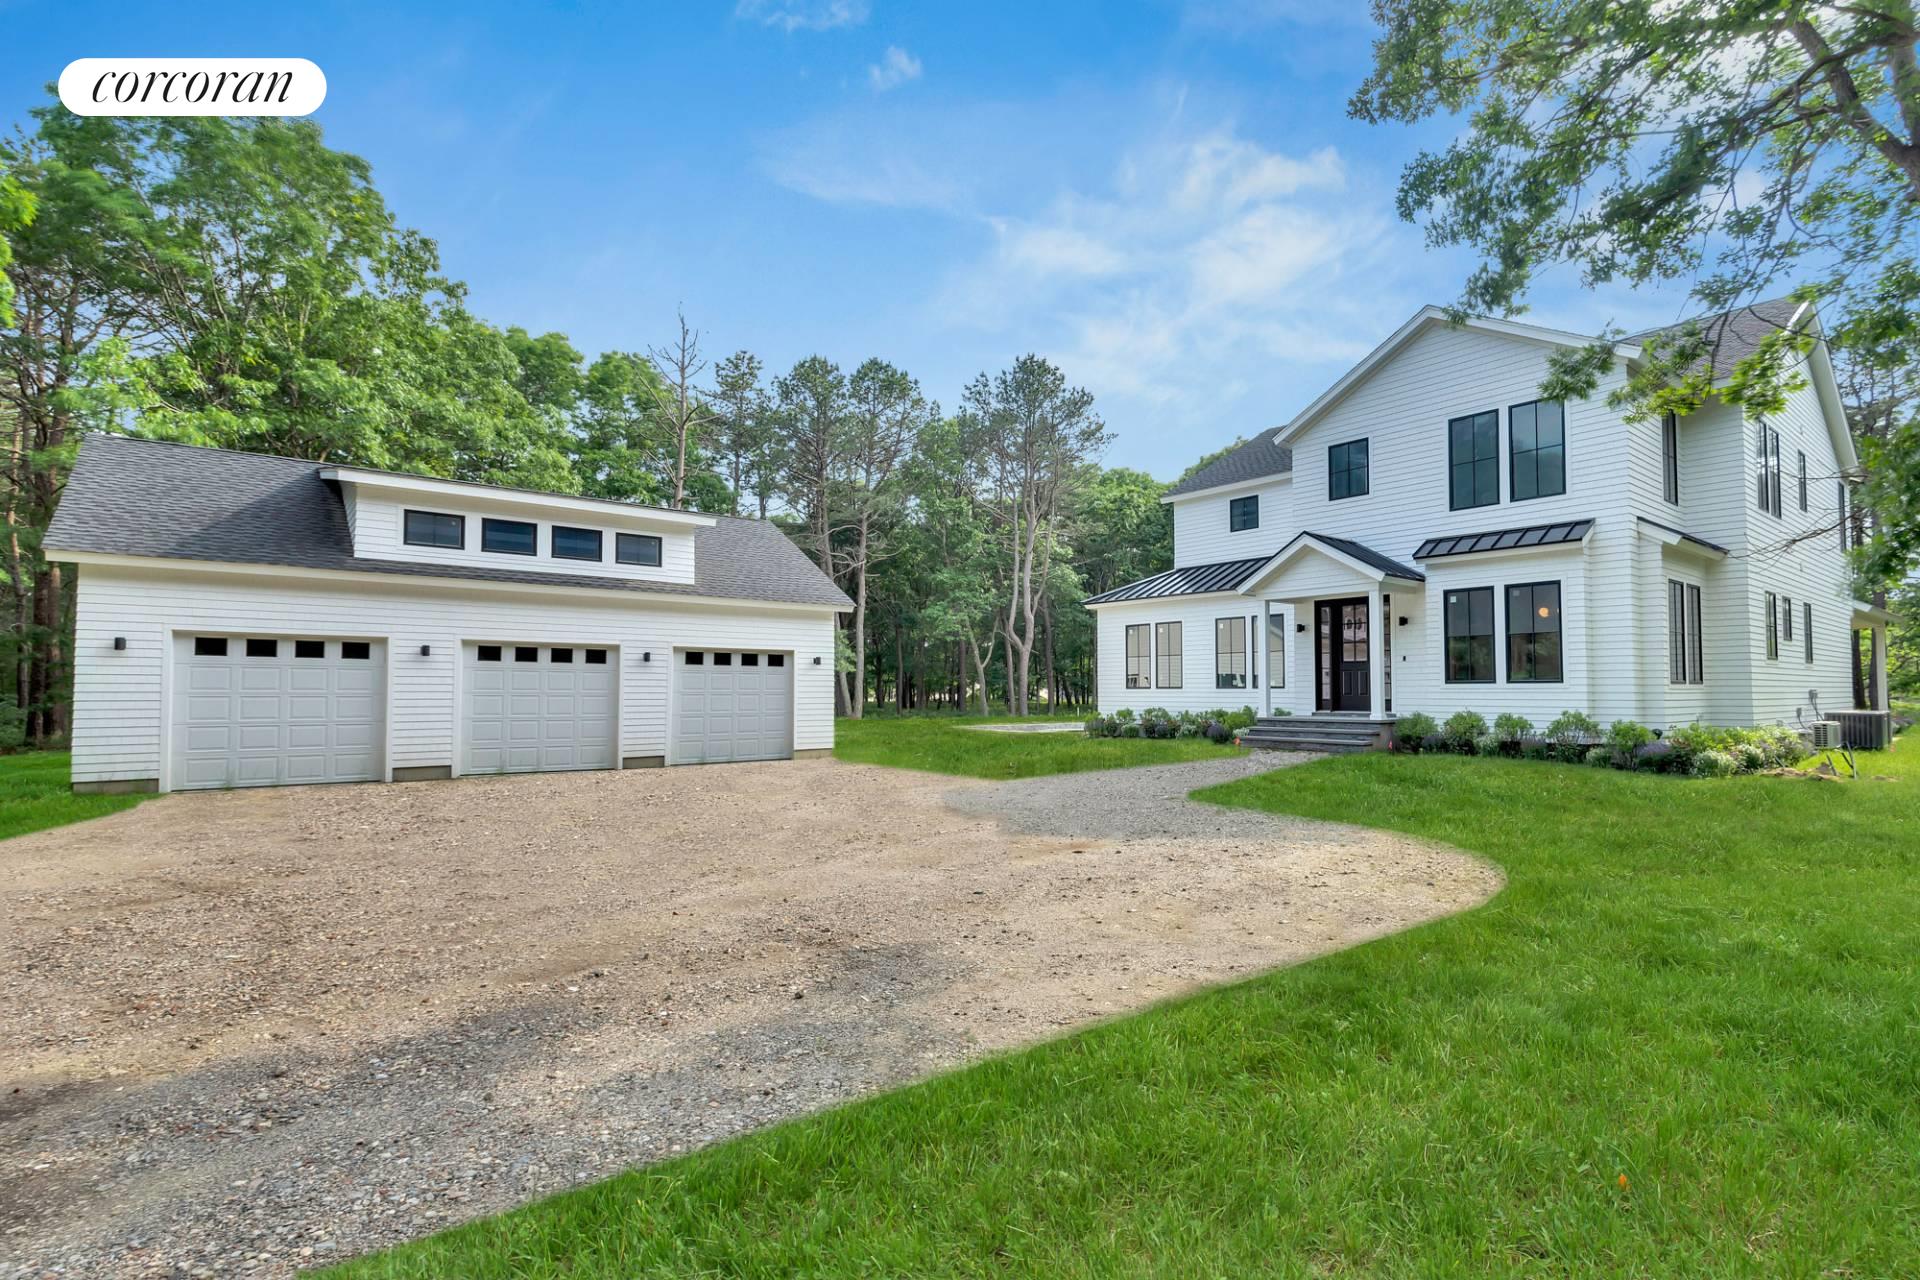 Homes for sale in Westhampton | View 97 North Summit Blvd | 4 Beds, 6 Baths